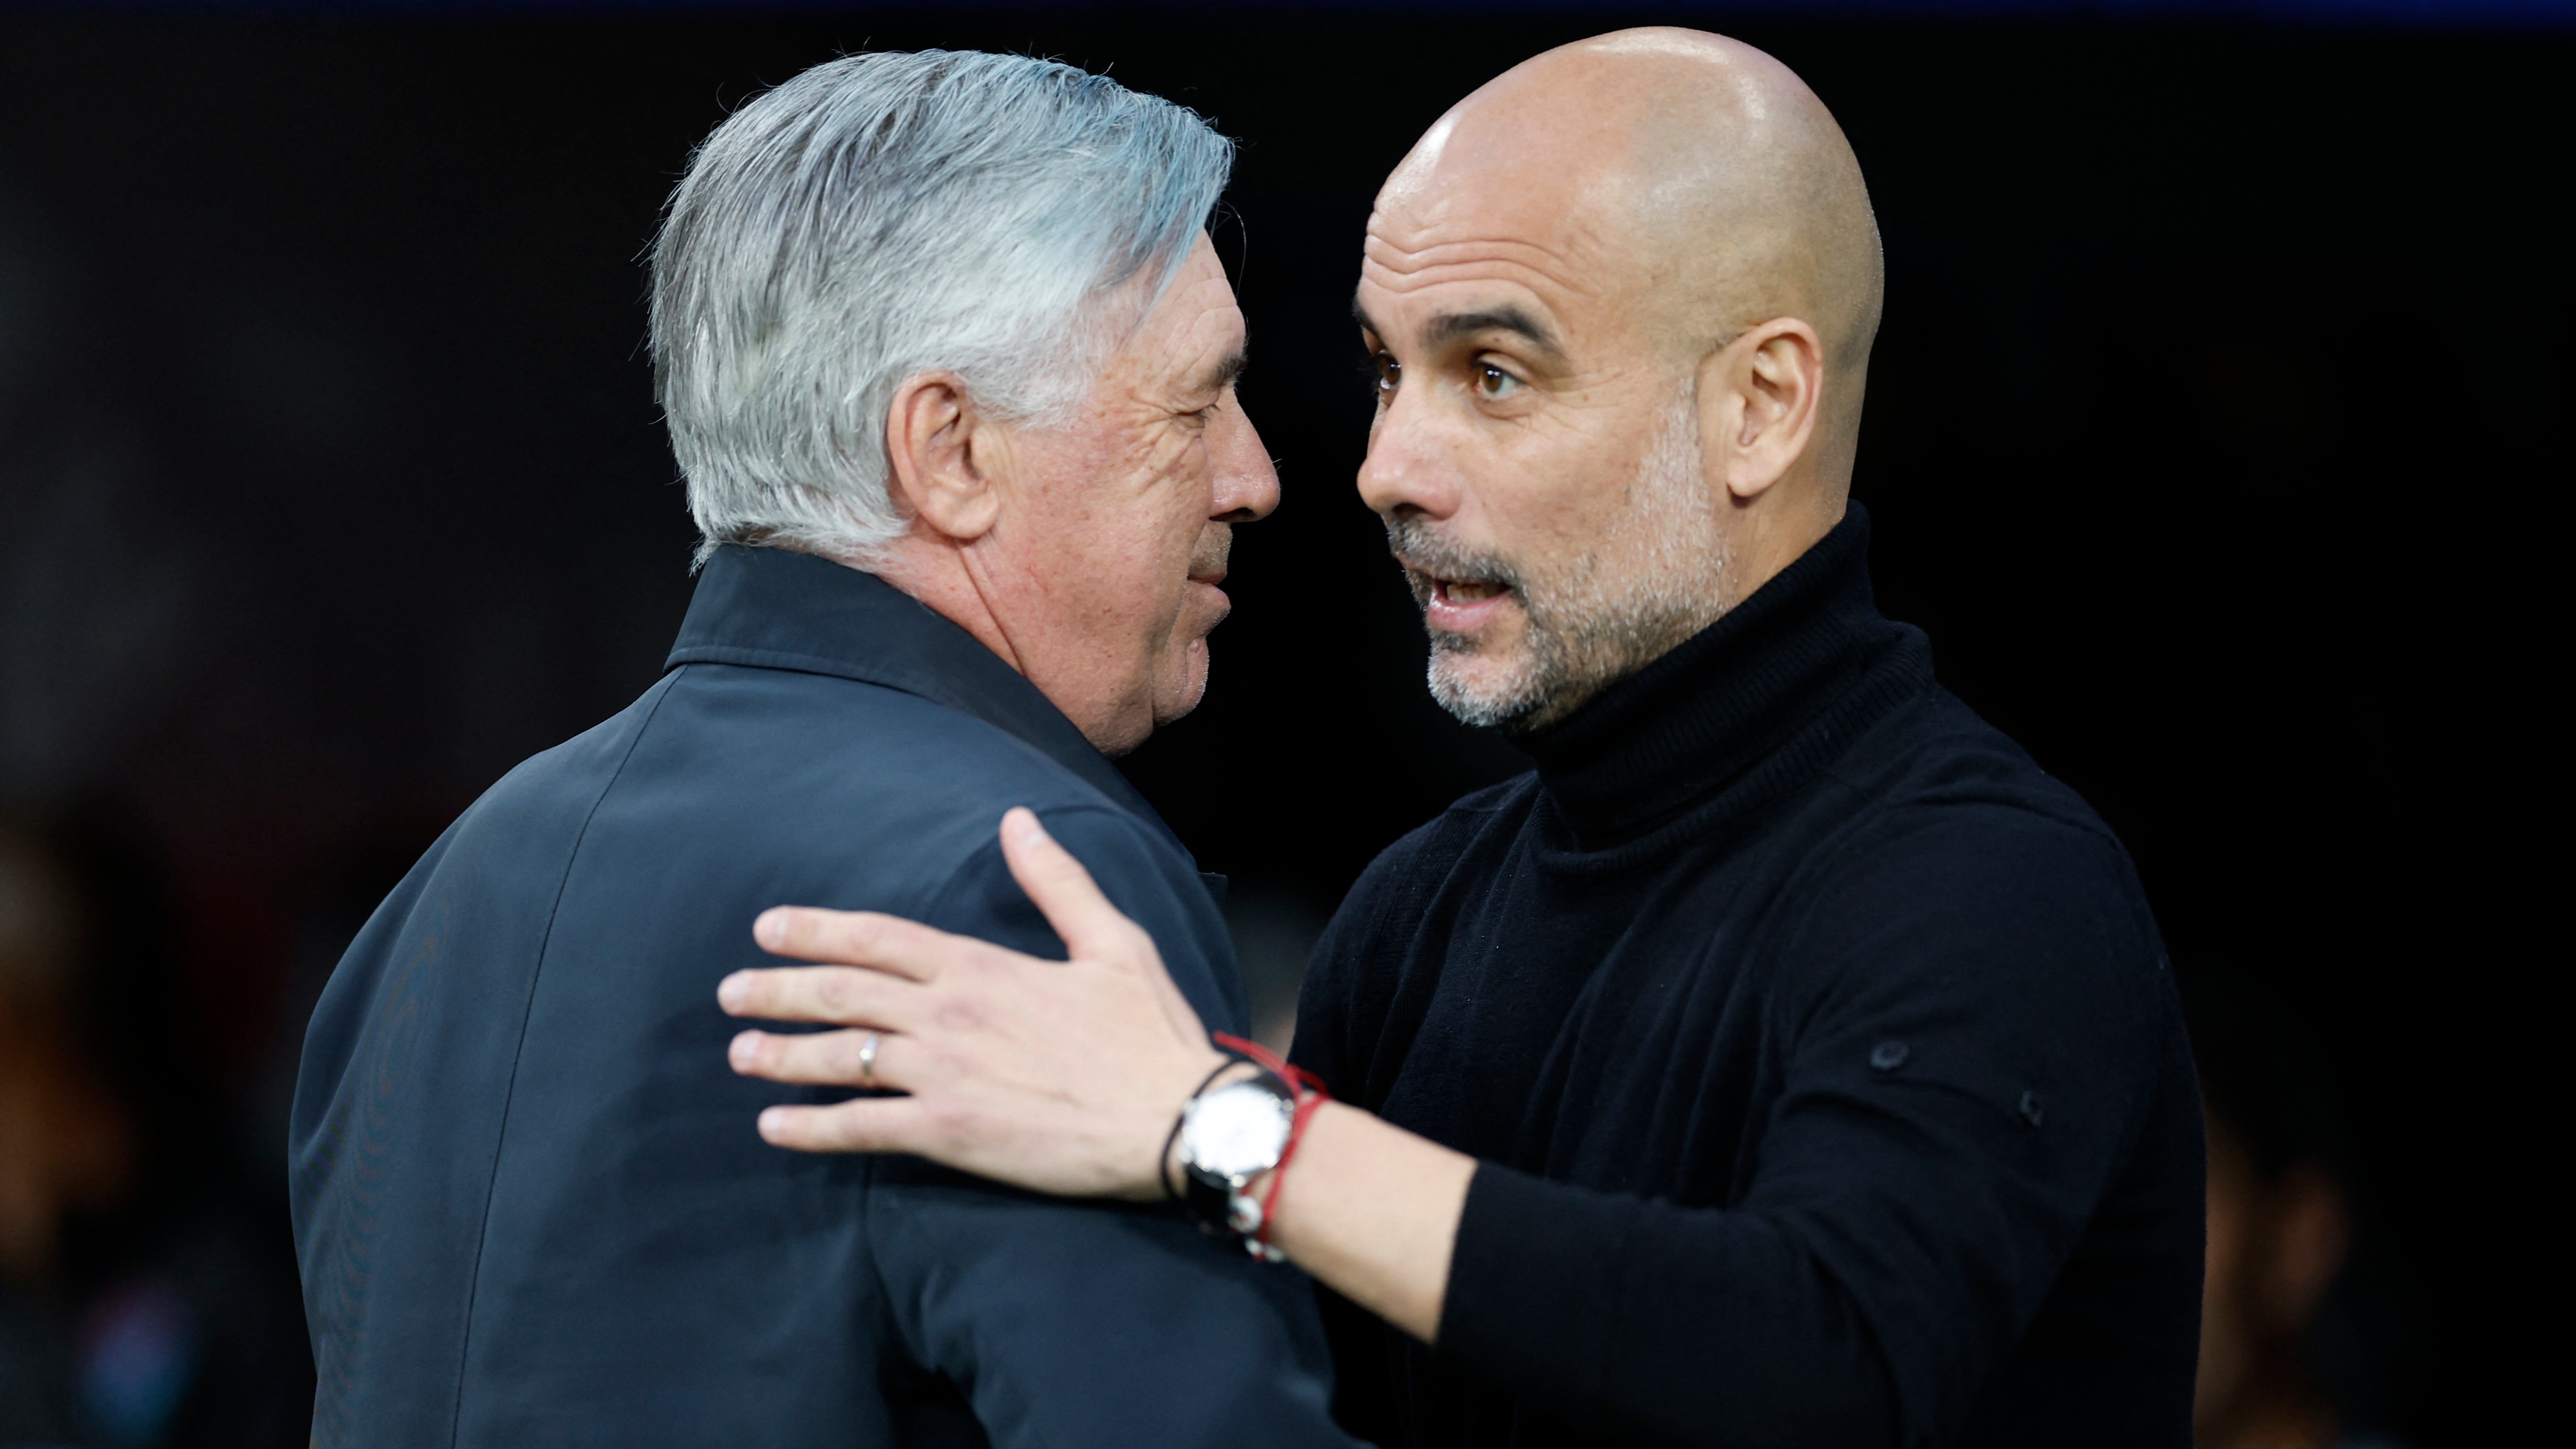 Soccer Football - Champions League - Semi Final - Second Leg - Real Madrid v Manchester City - Santiago Bernabeu, Madrid, Spain - May 4, 2022 Real Madrid coach Carlo Ancelotti with Manchester City manager Pep Guardiola before the match REUTERS/Juan Medina